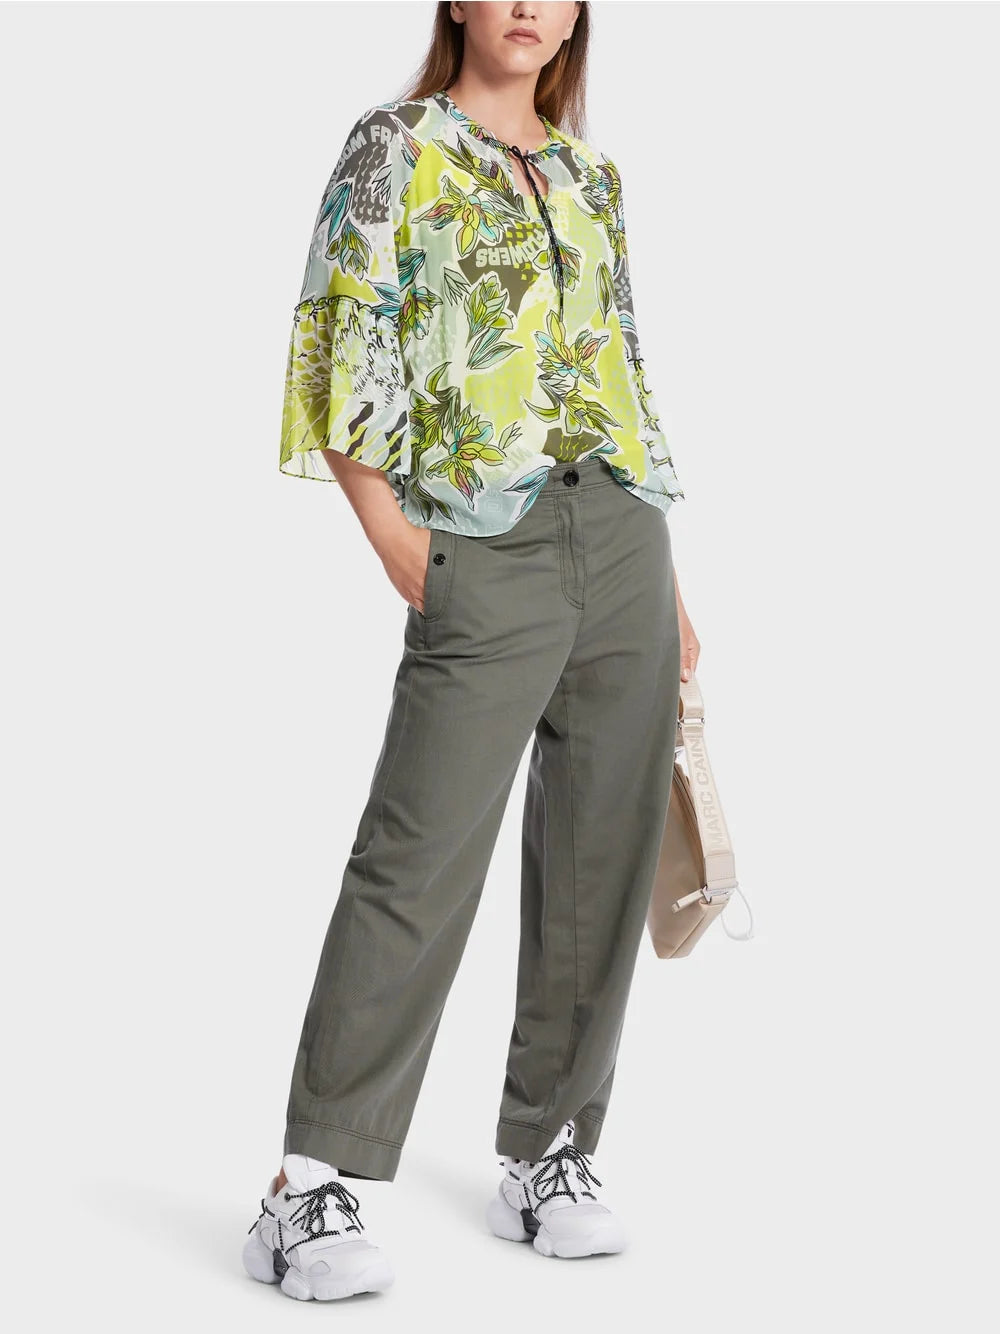 Marc Cain Pattern Raglan blouse made from viscose crepe